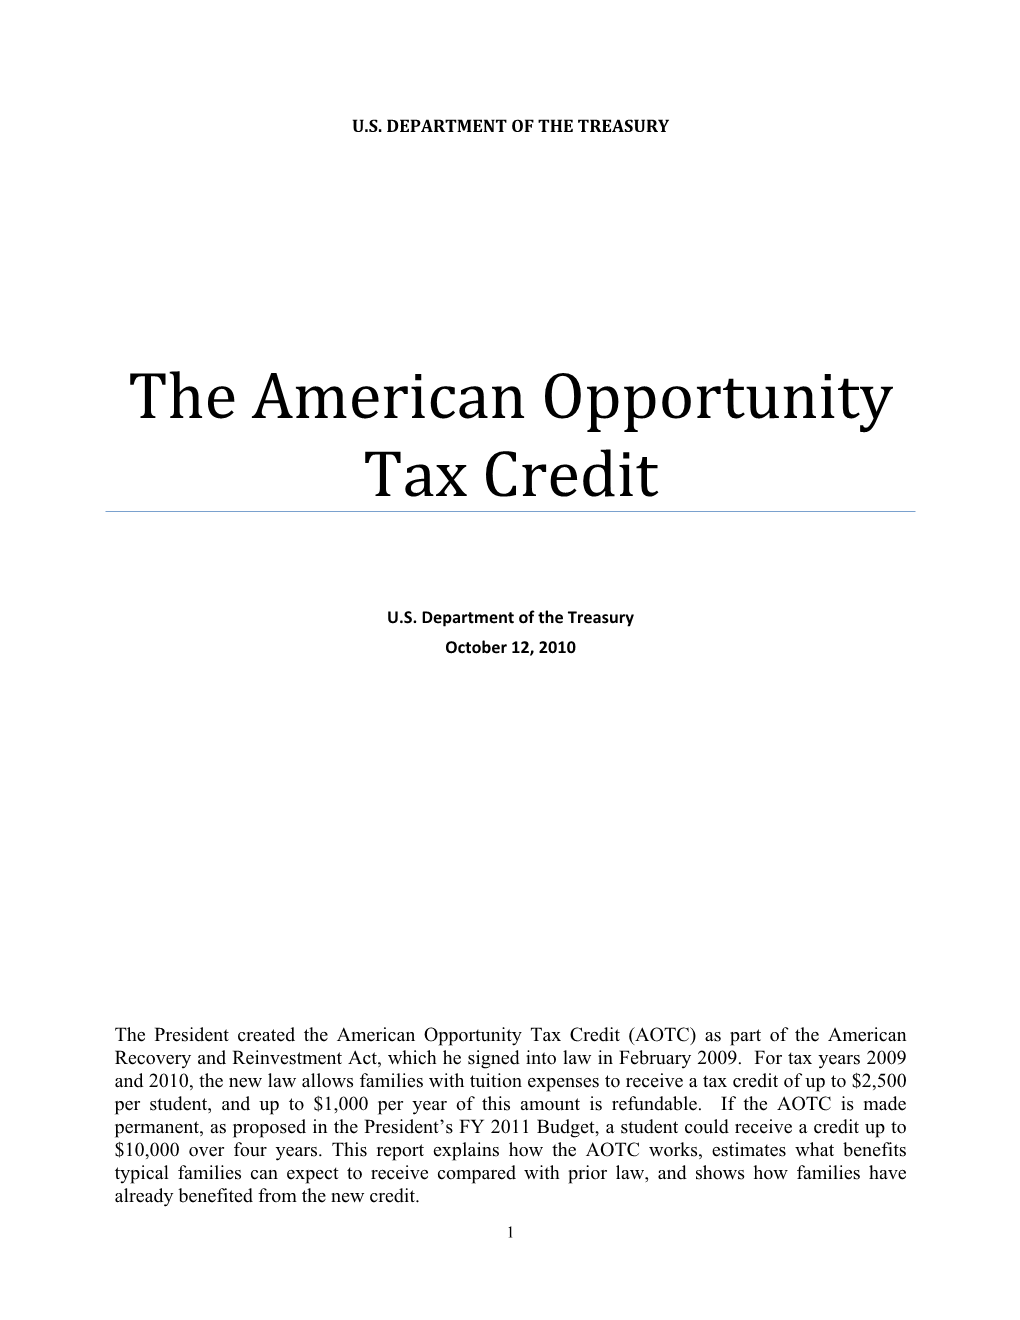 The American Opportunity Tax Credit